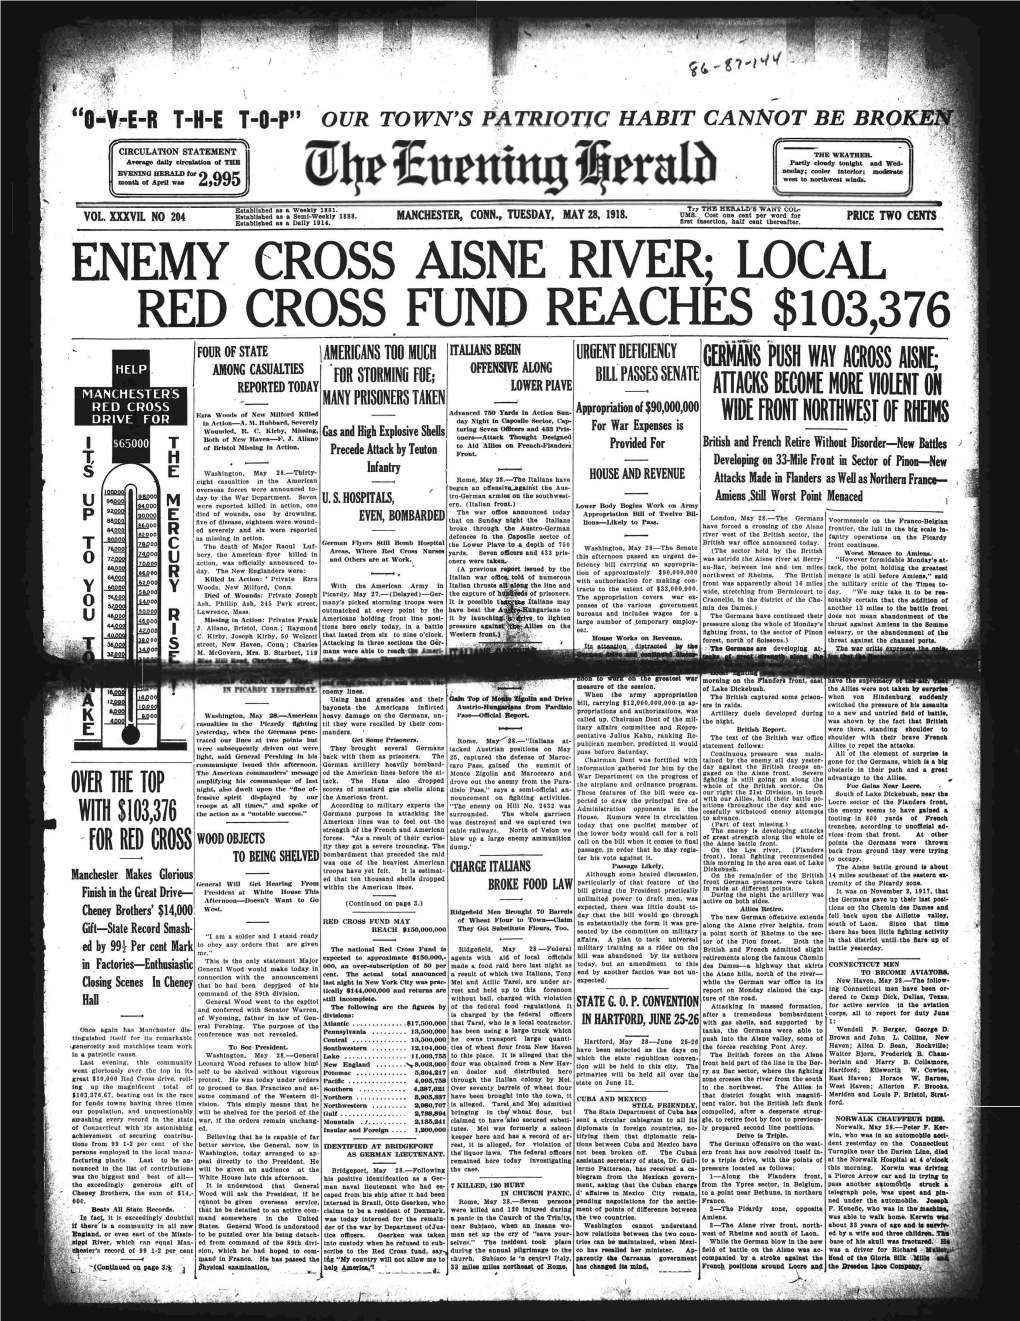 Enemy Cross Aisne River; Local Red Cross Fund Reaches $103,376